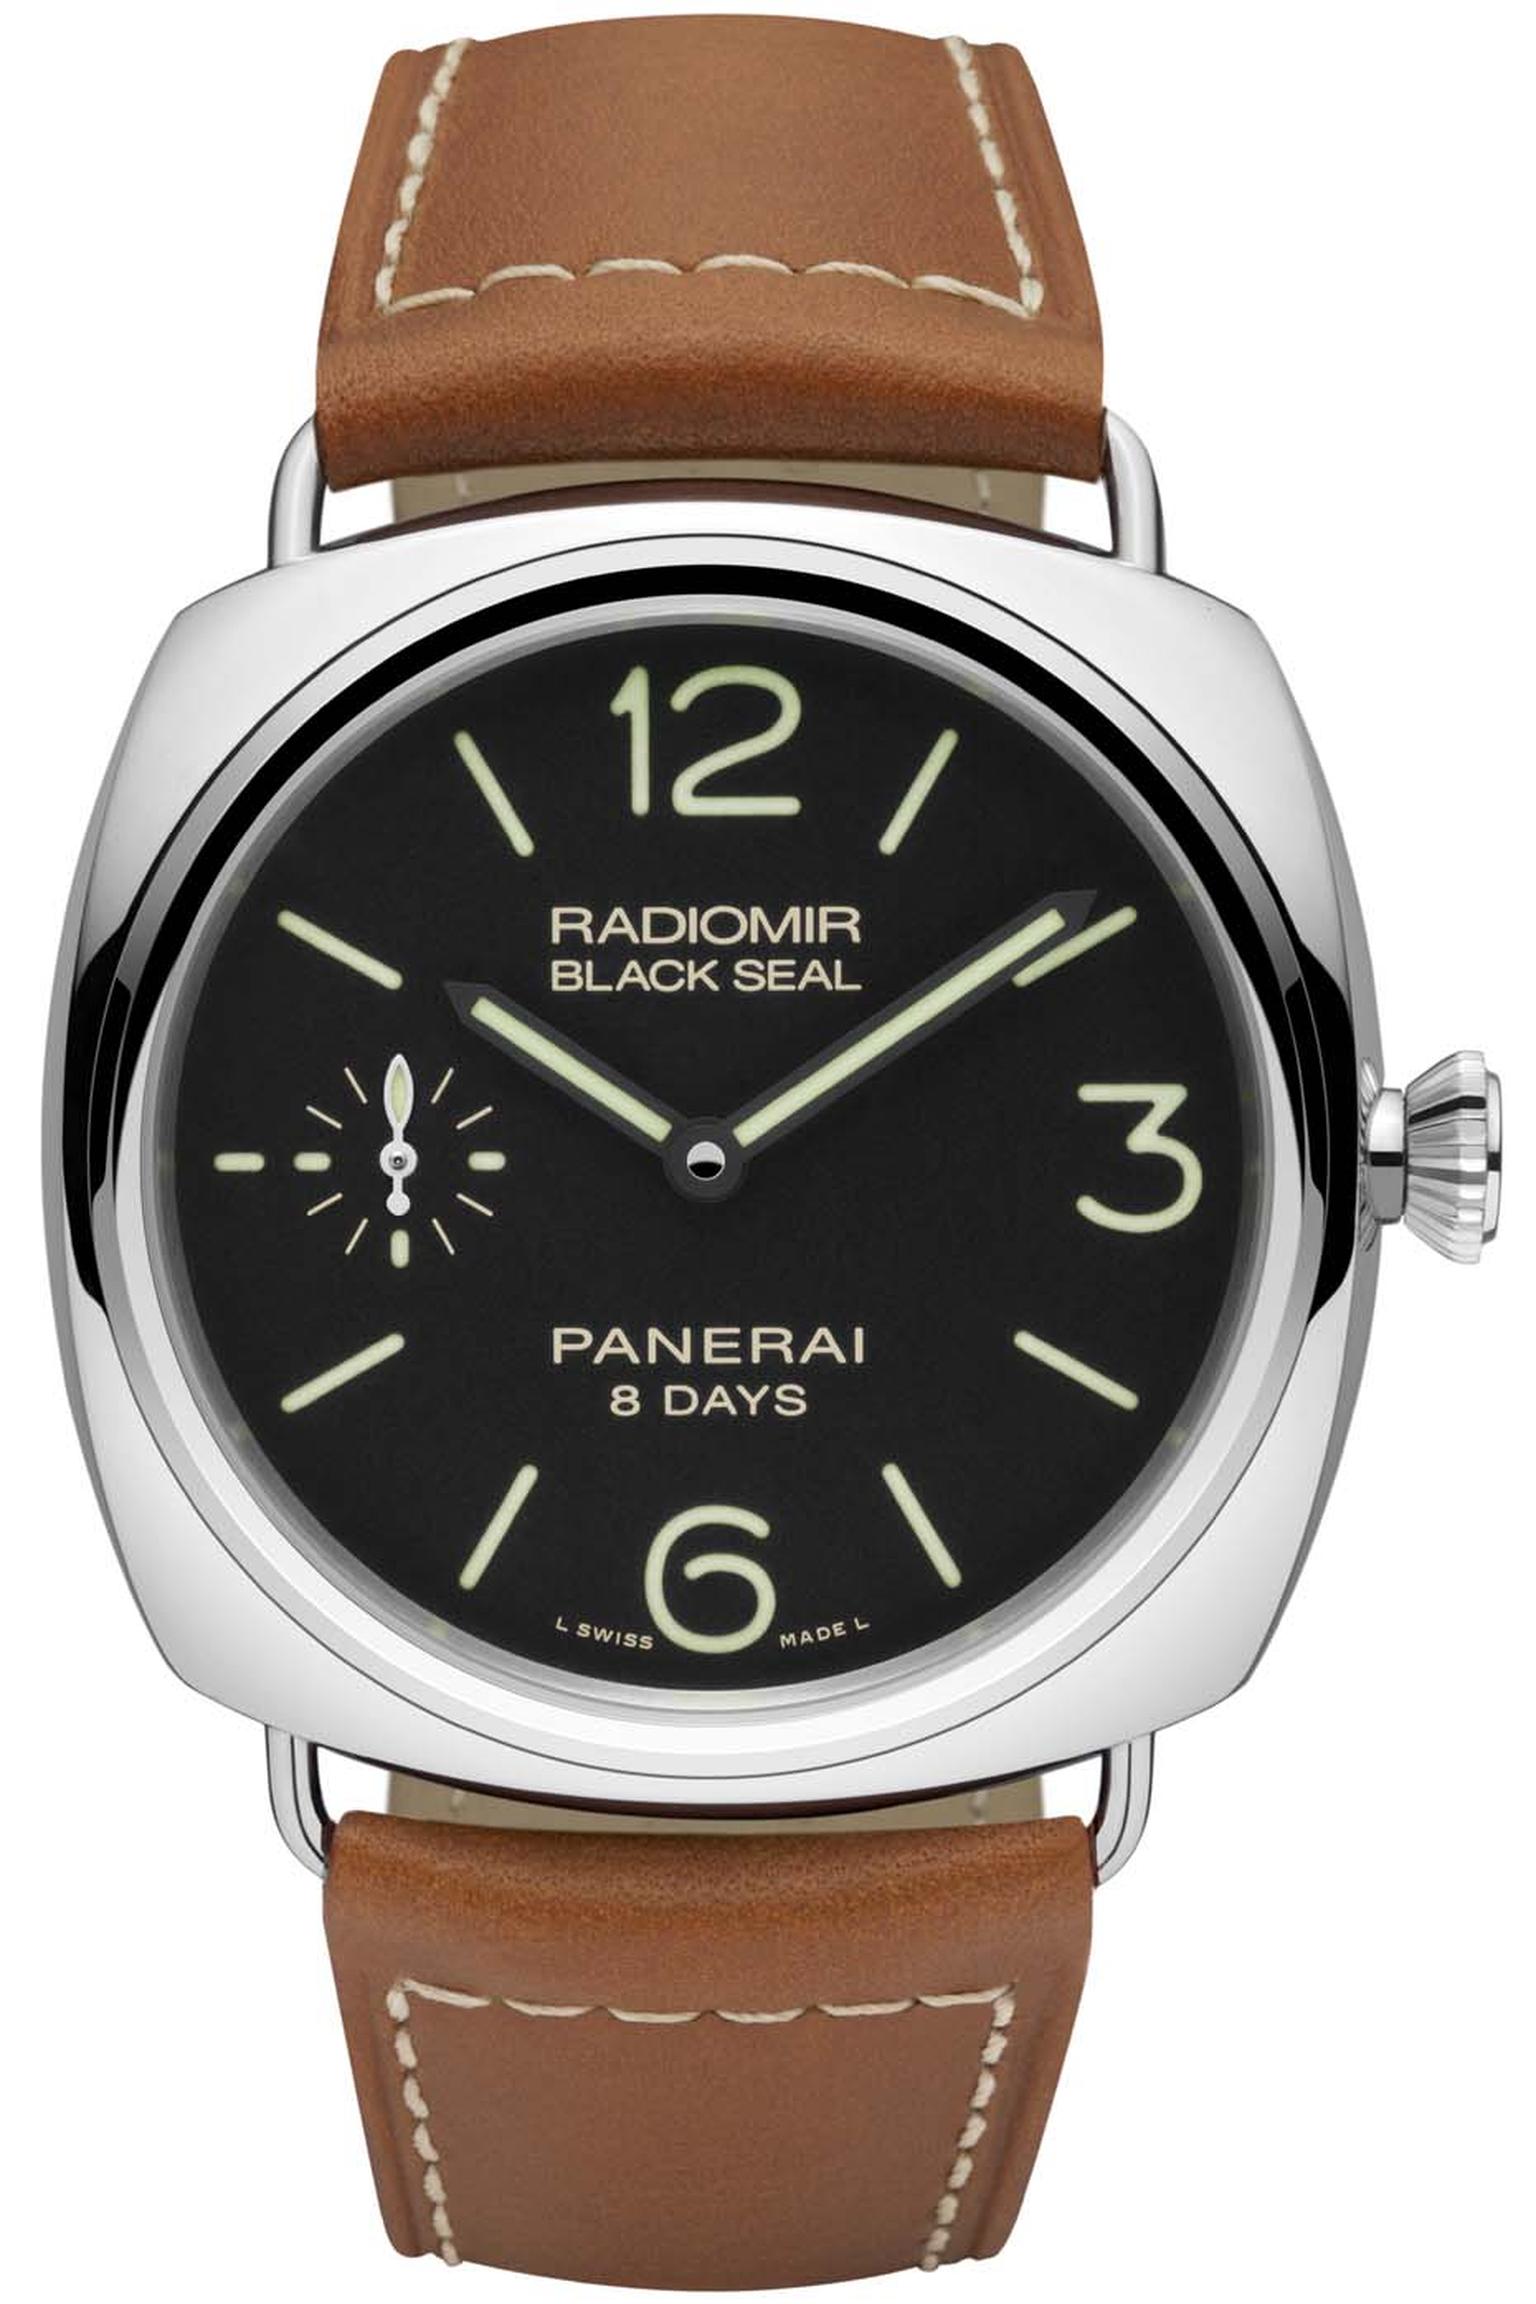 Panerai Radiomir Black Seal 8 Days Acciaio has been equipped with calibre P.5000, Panerai's muscle movement with an impressive eight-day power reserve, and pays homage to the Gamma Group of Italian frogmen from WWII.